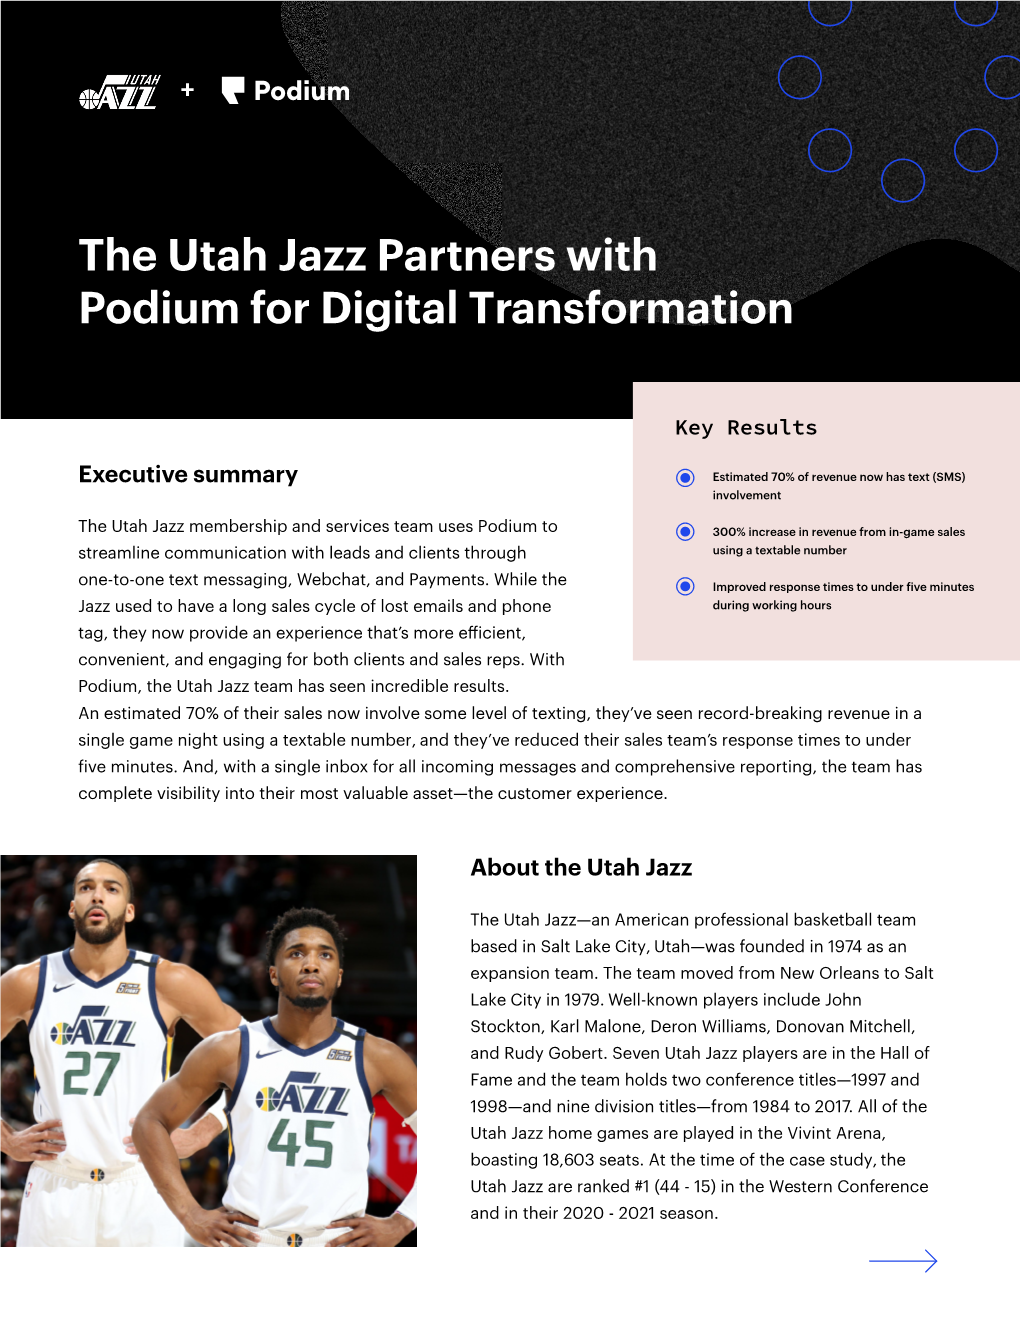 The Utah Jazz Partners with Podium for Digital Transformation